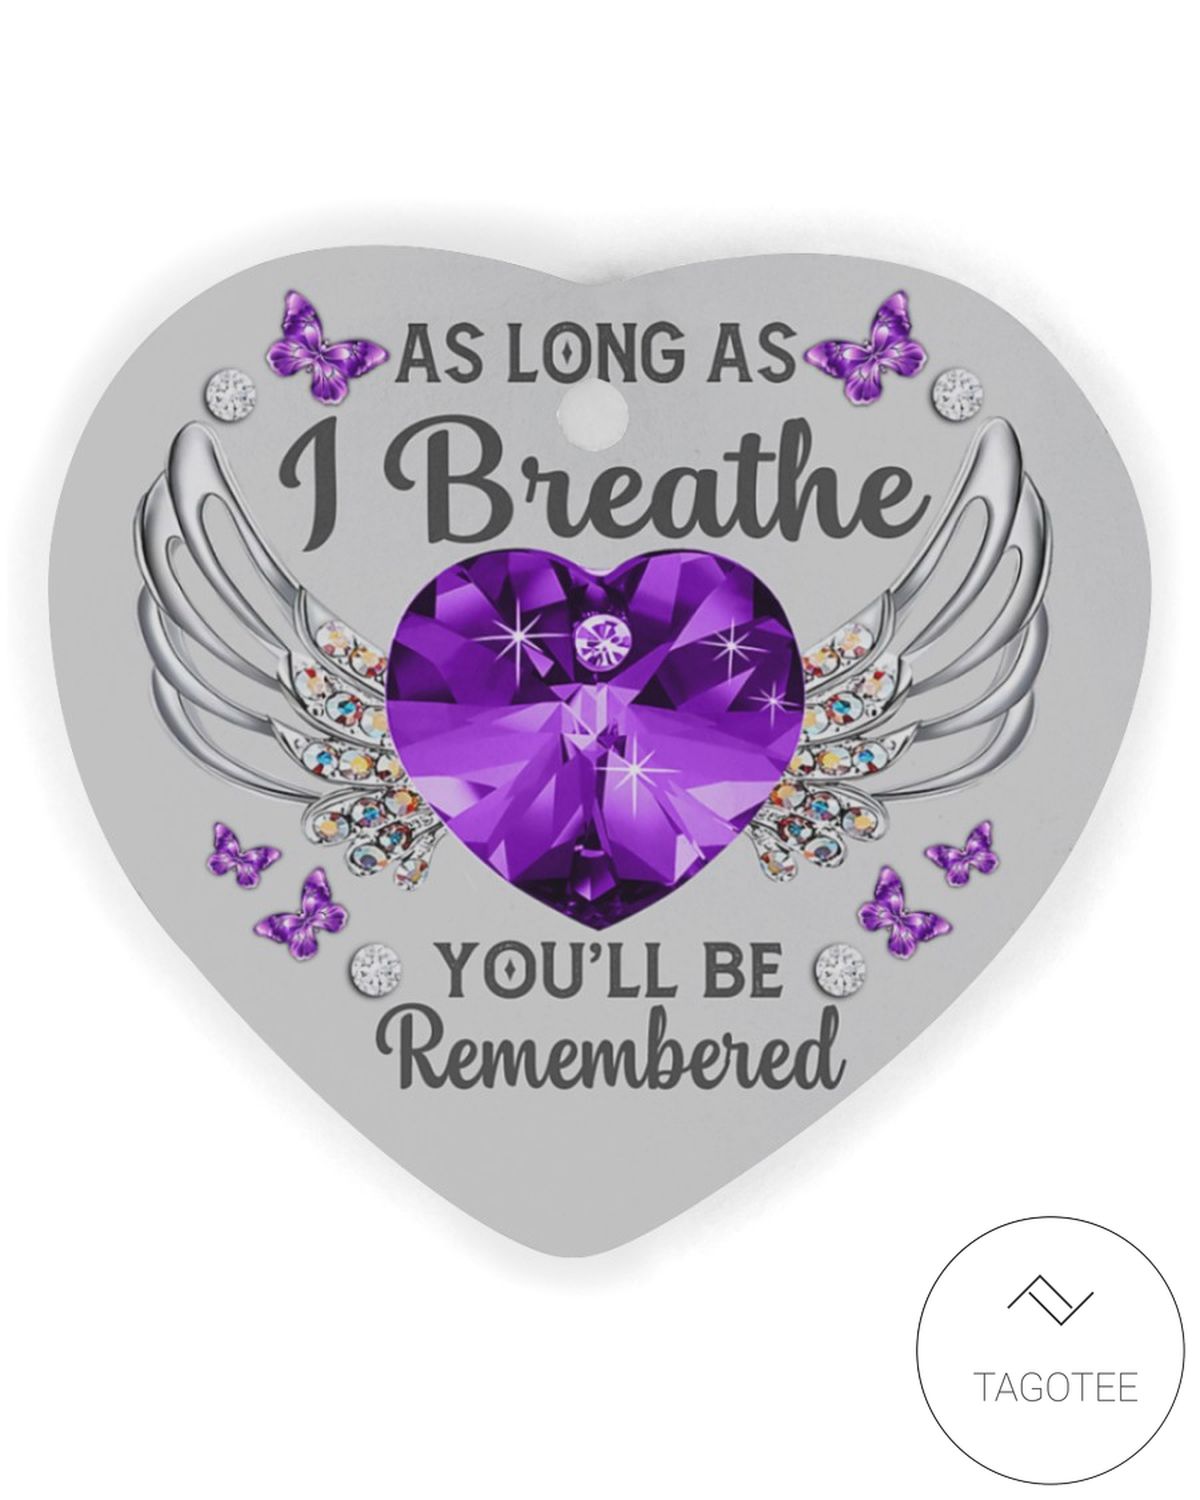 As Long As I Breathe You'll Be Remembered Heart Ornament